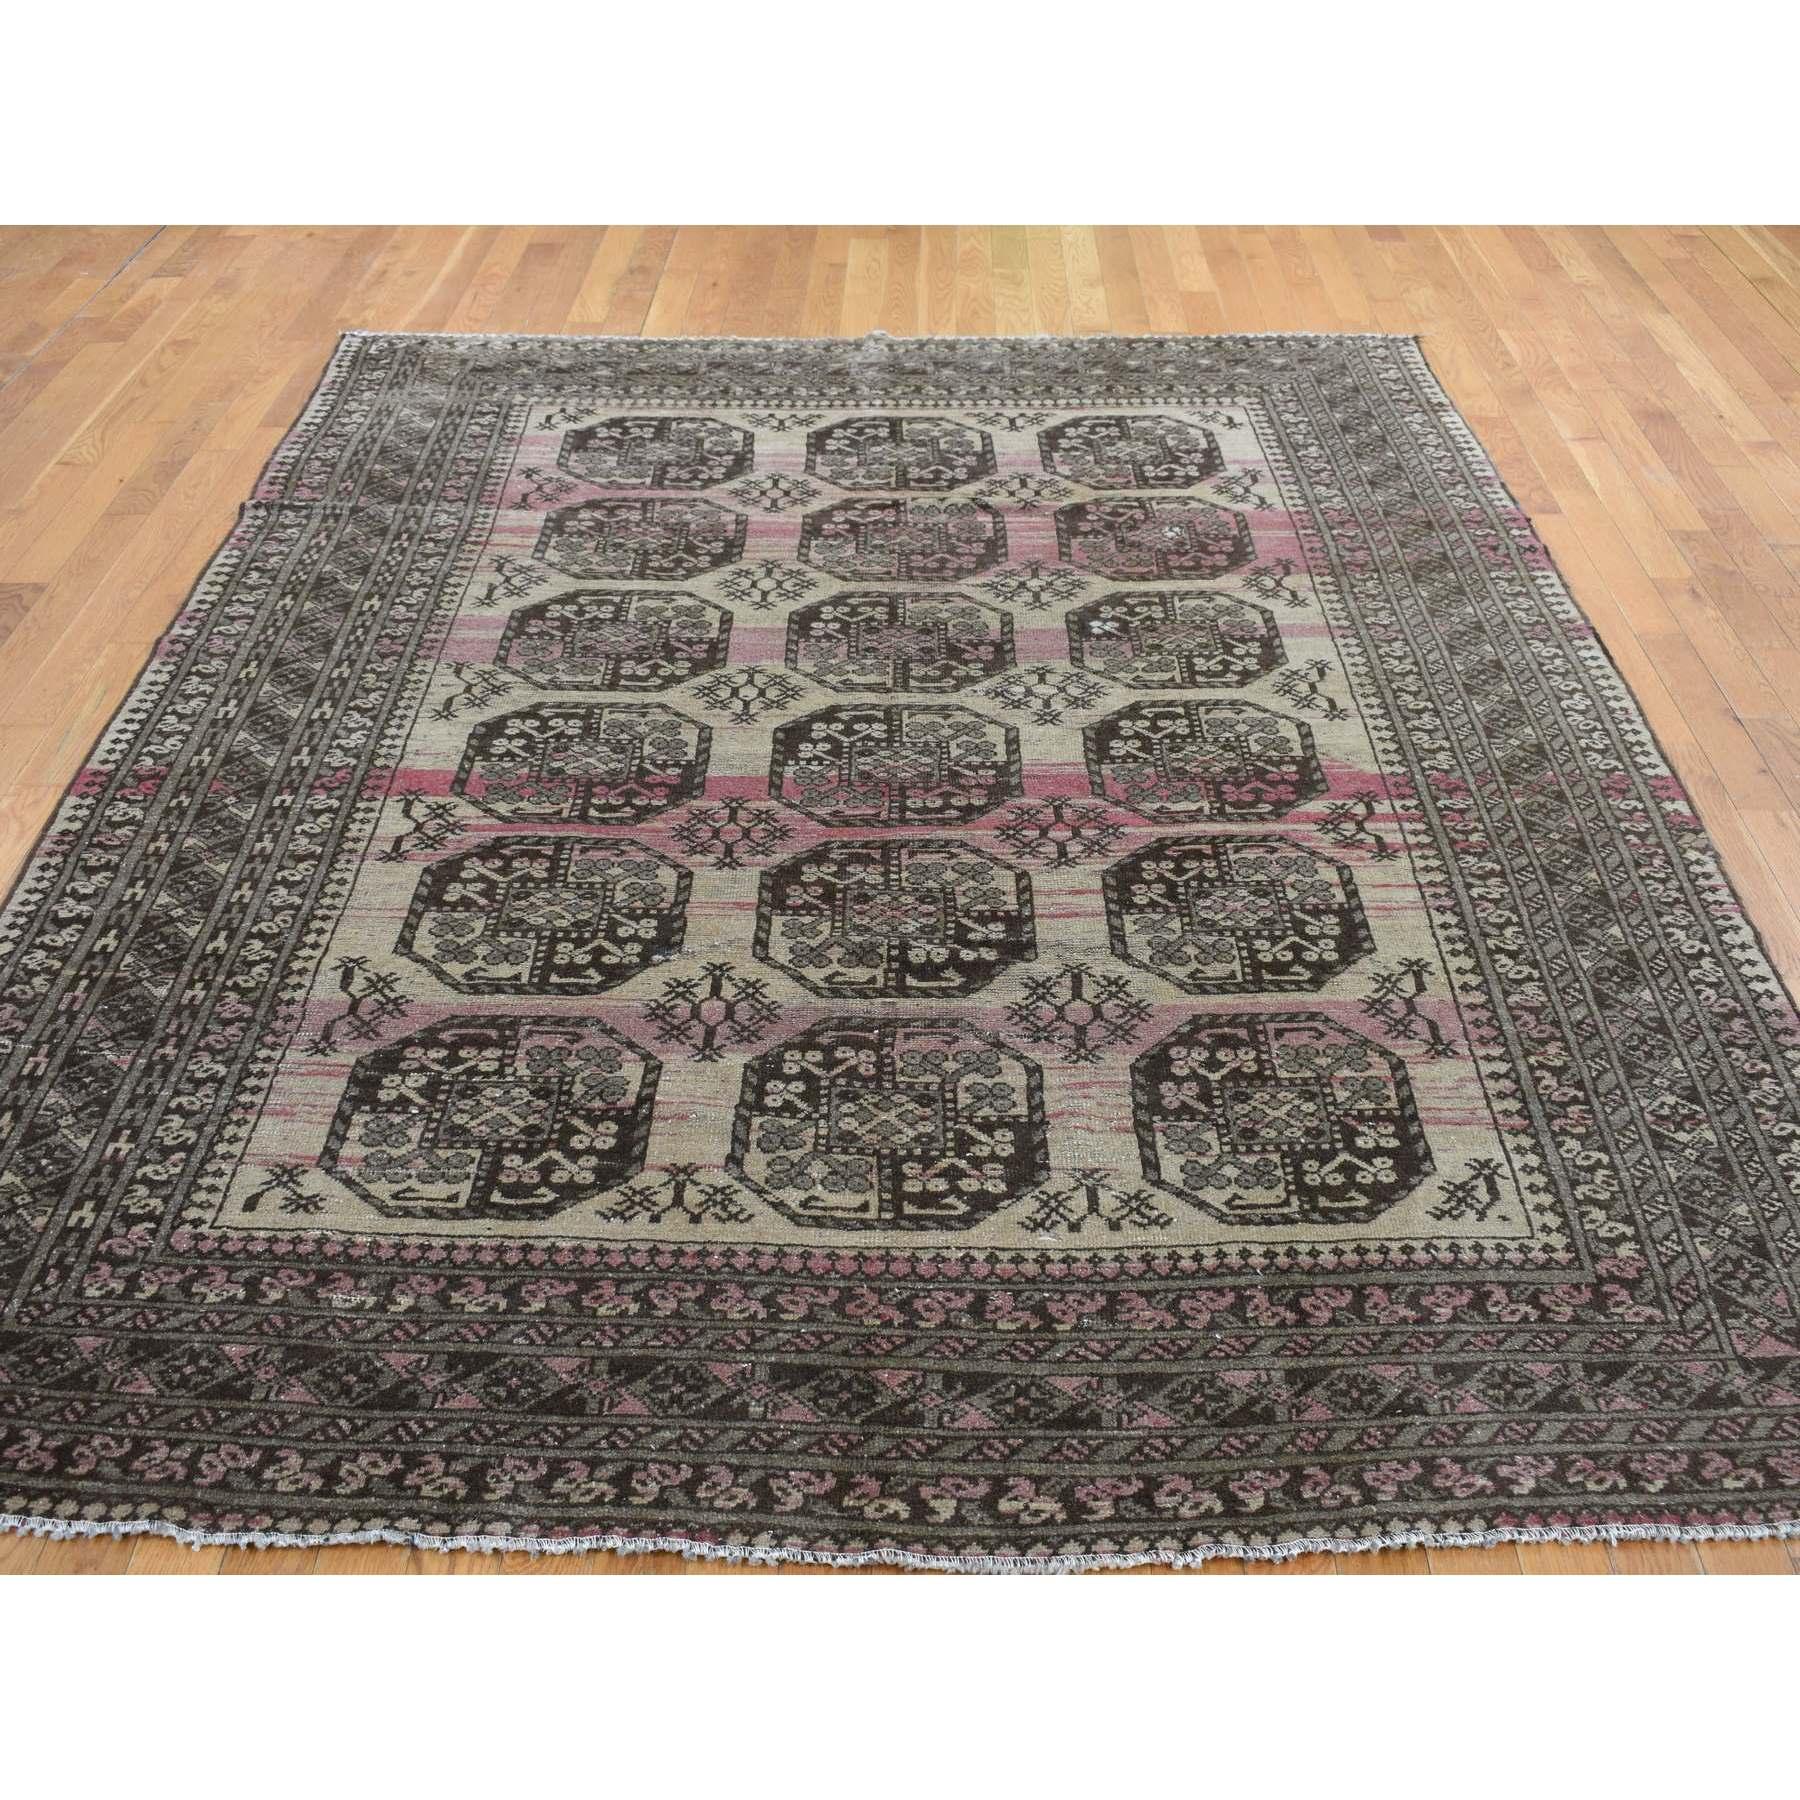 This fabulous Hand-Knotted carpet has been created and designed for extra strength and durability. This rug has been handcrafted for weeks in the traditional method that is used to make
Exact Rug Size in Feet and Inches : 7'5